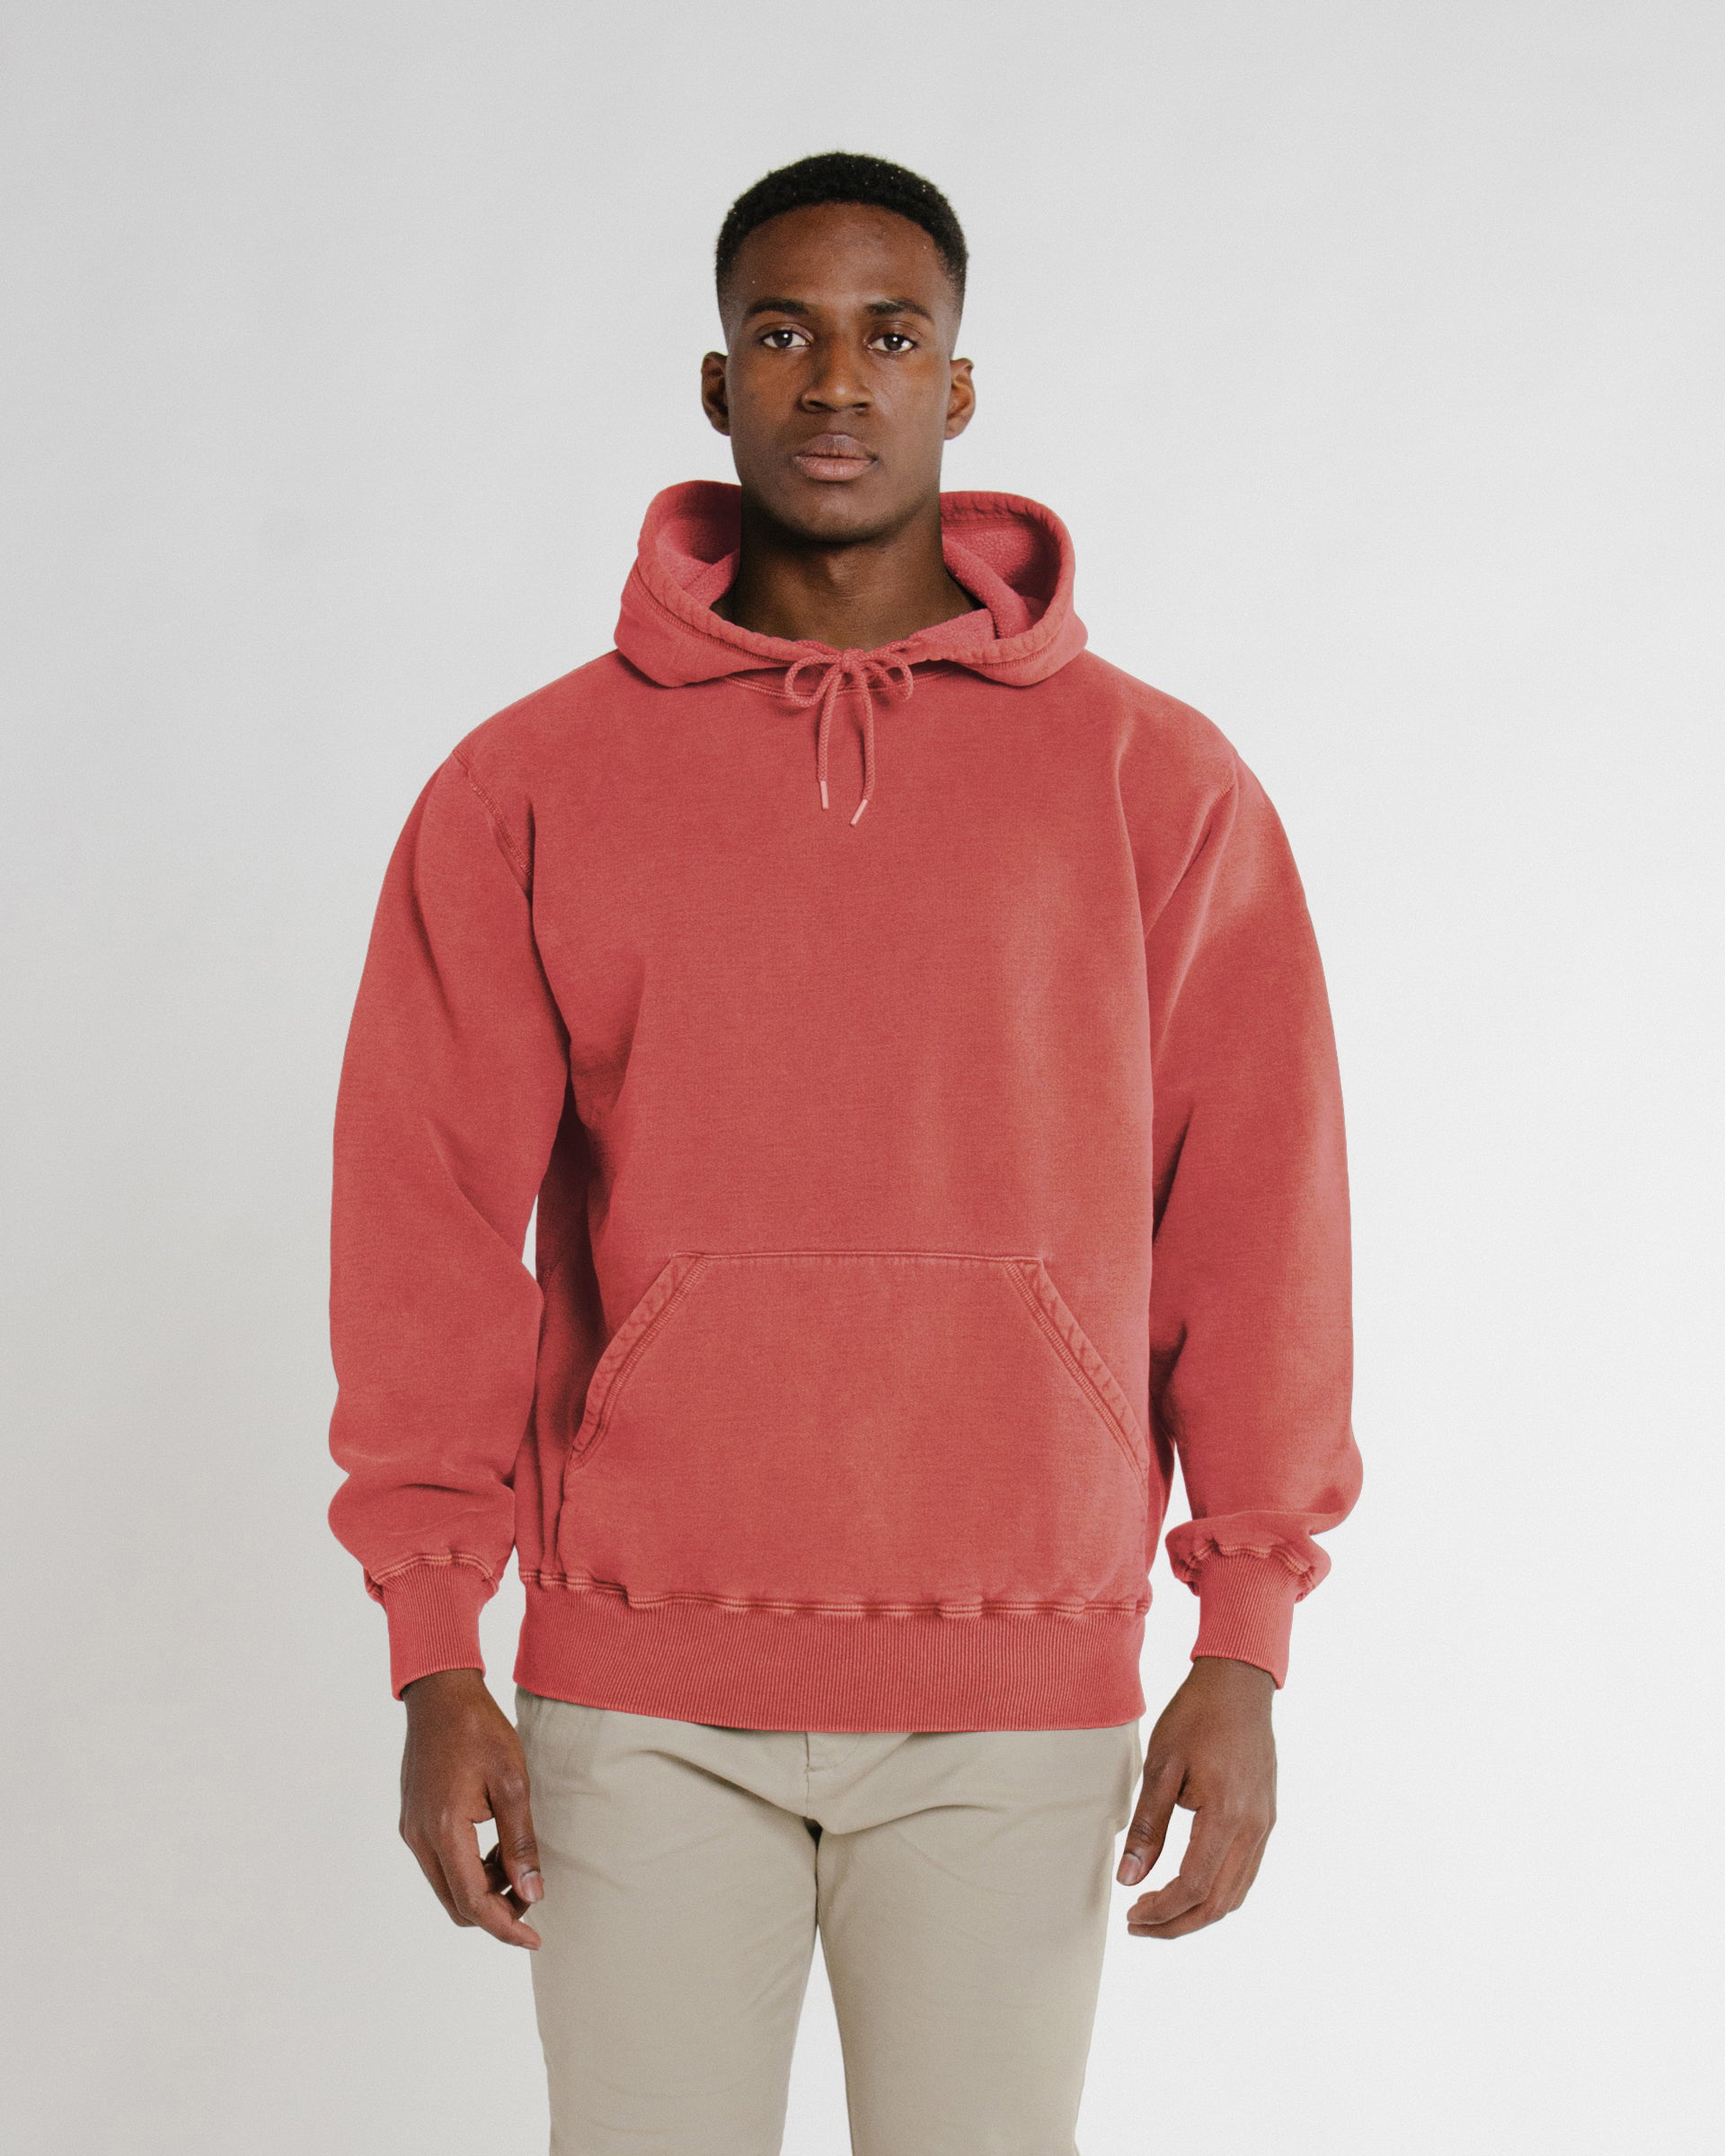 DELUXEHOODIERED WOOD CLASSICS x WDS DELUXE HOODIE